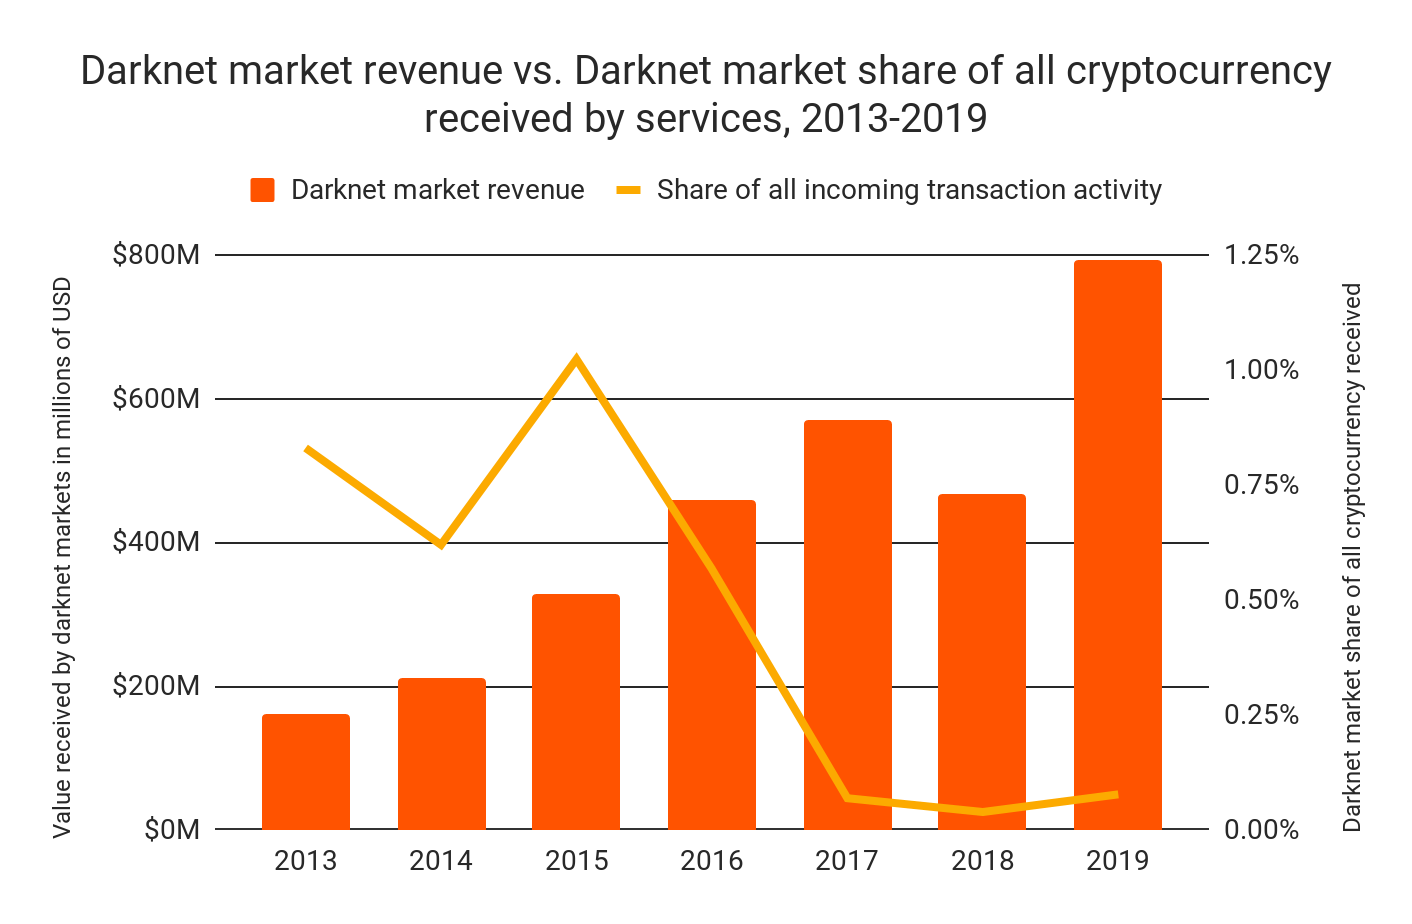 Darknet market share of all crypto payments, 2013-2019